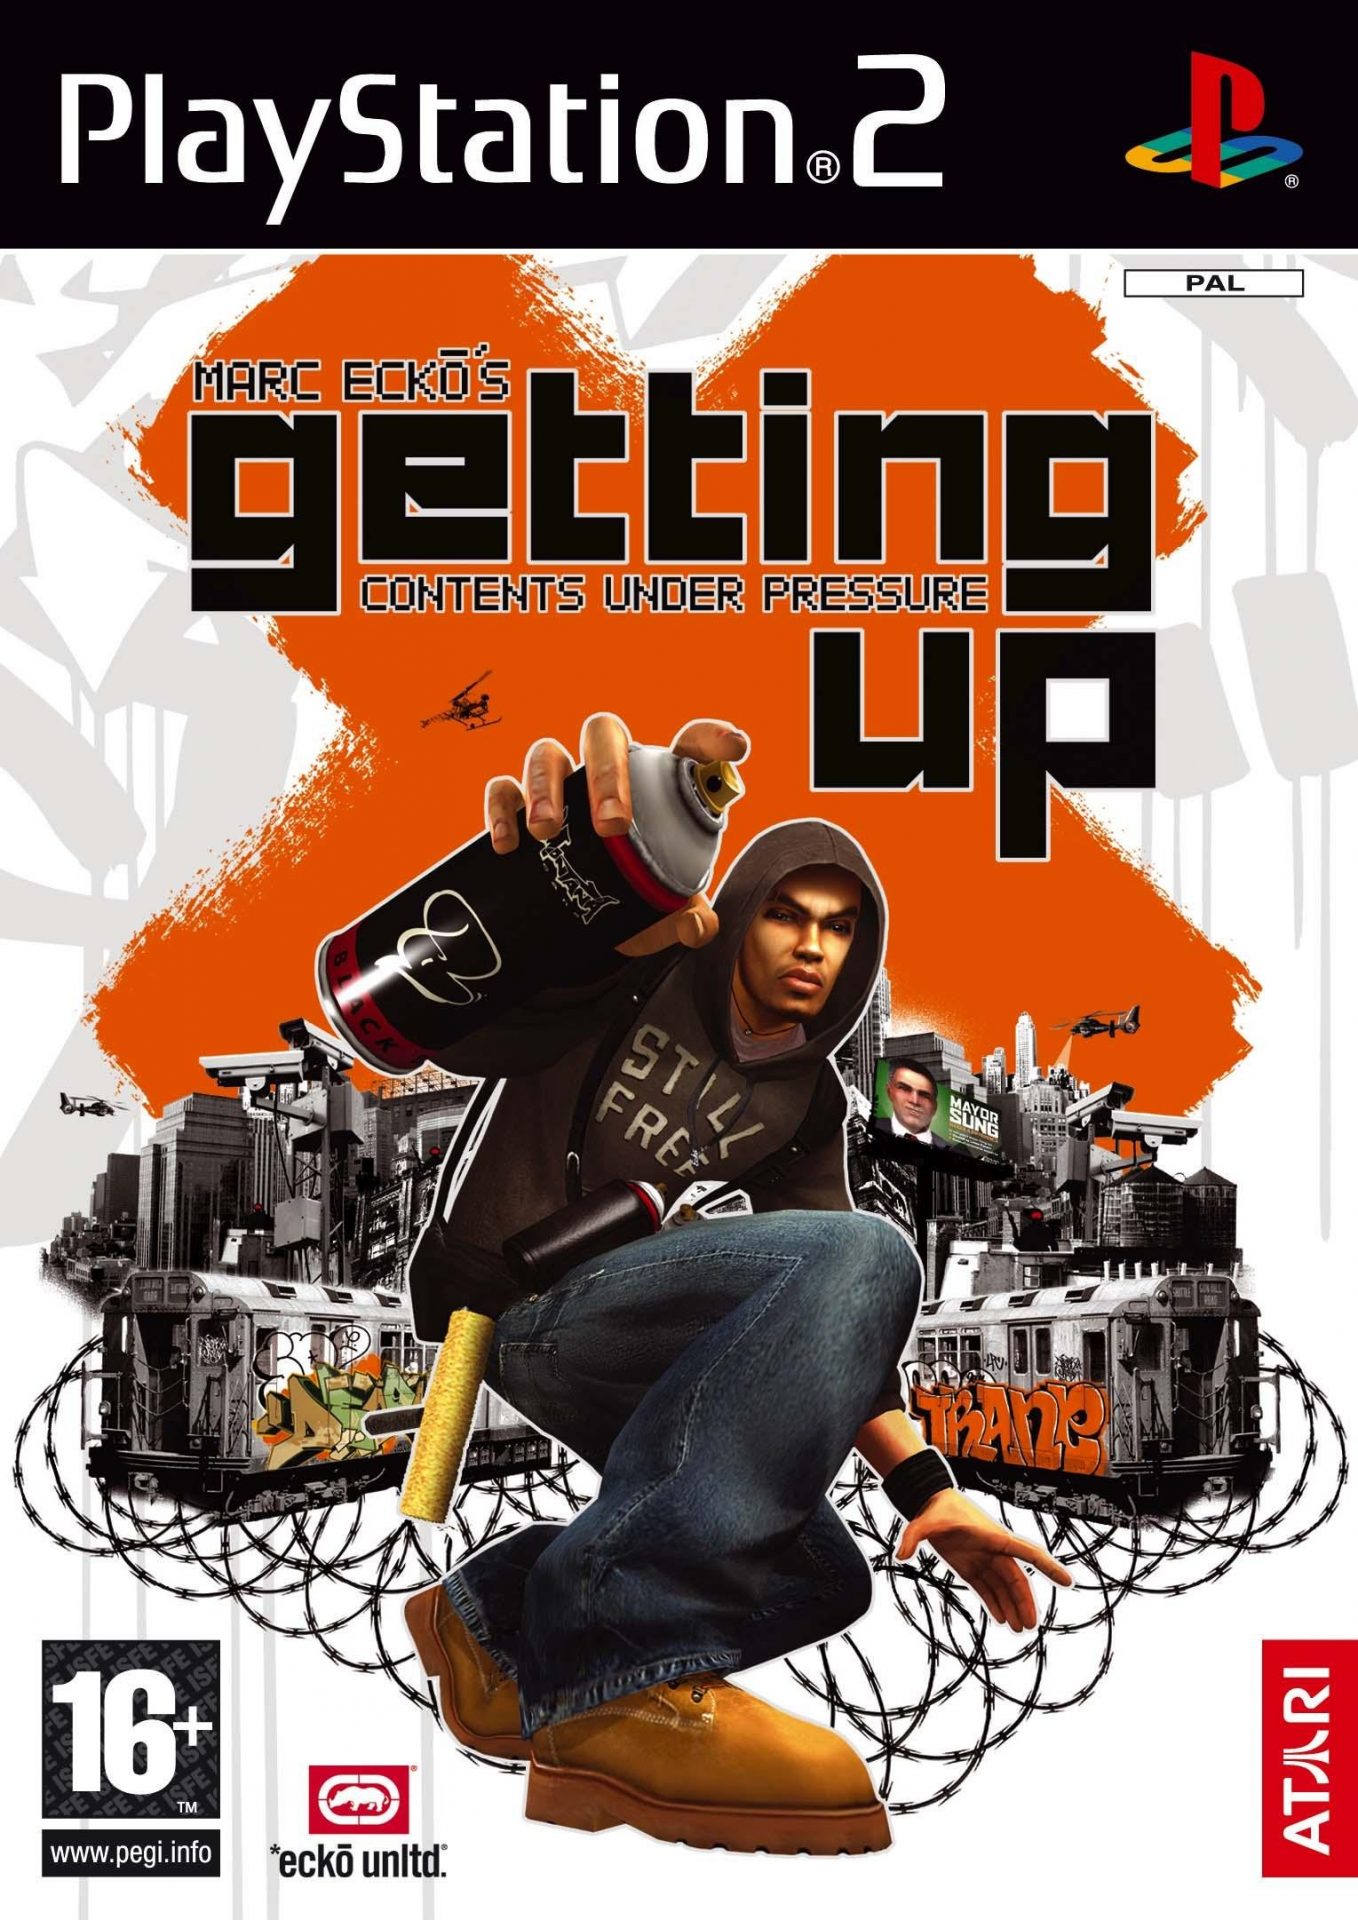 The coverart image of Marc Ecko's Getting Up: Contents Under Pressure